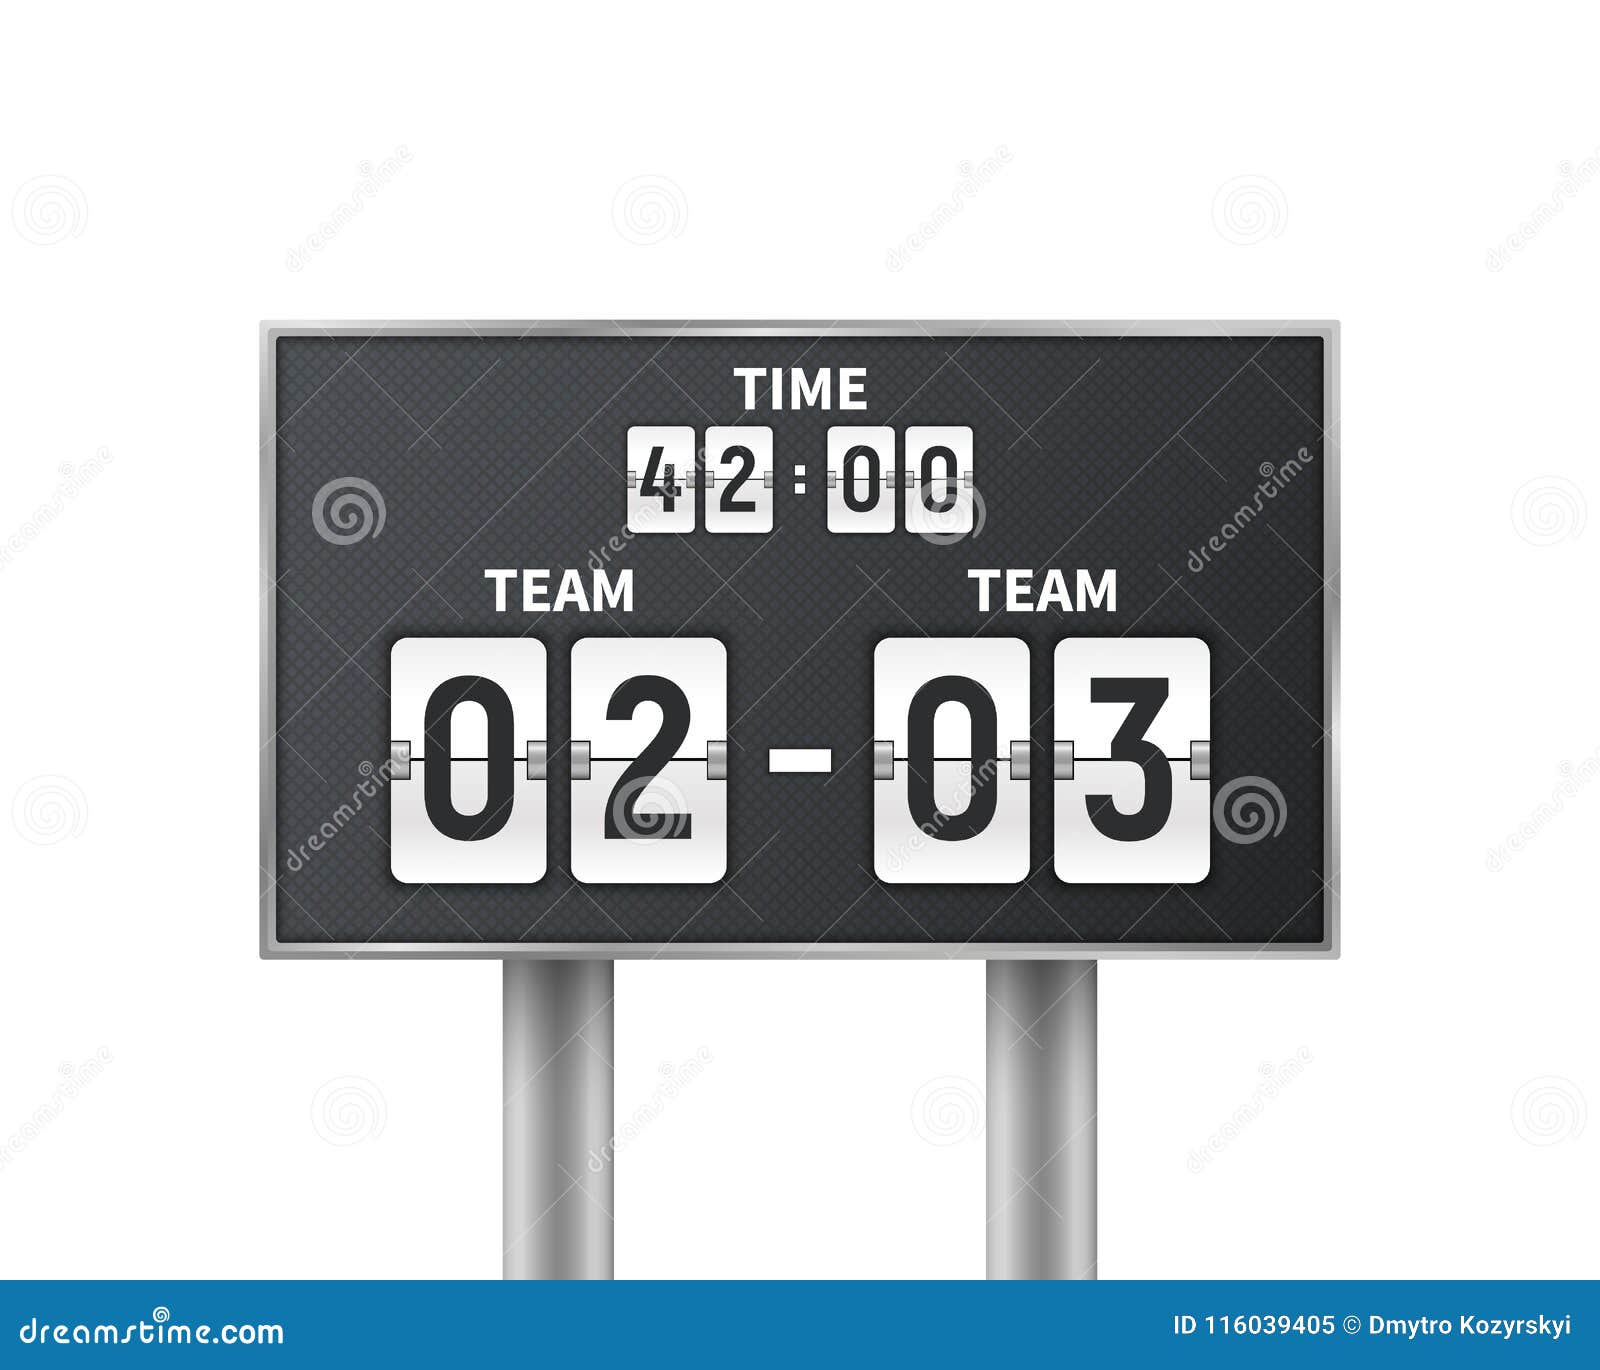 soccer, football mechanical scoreboard  on white background.  countdown with time, result display. concept